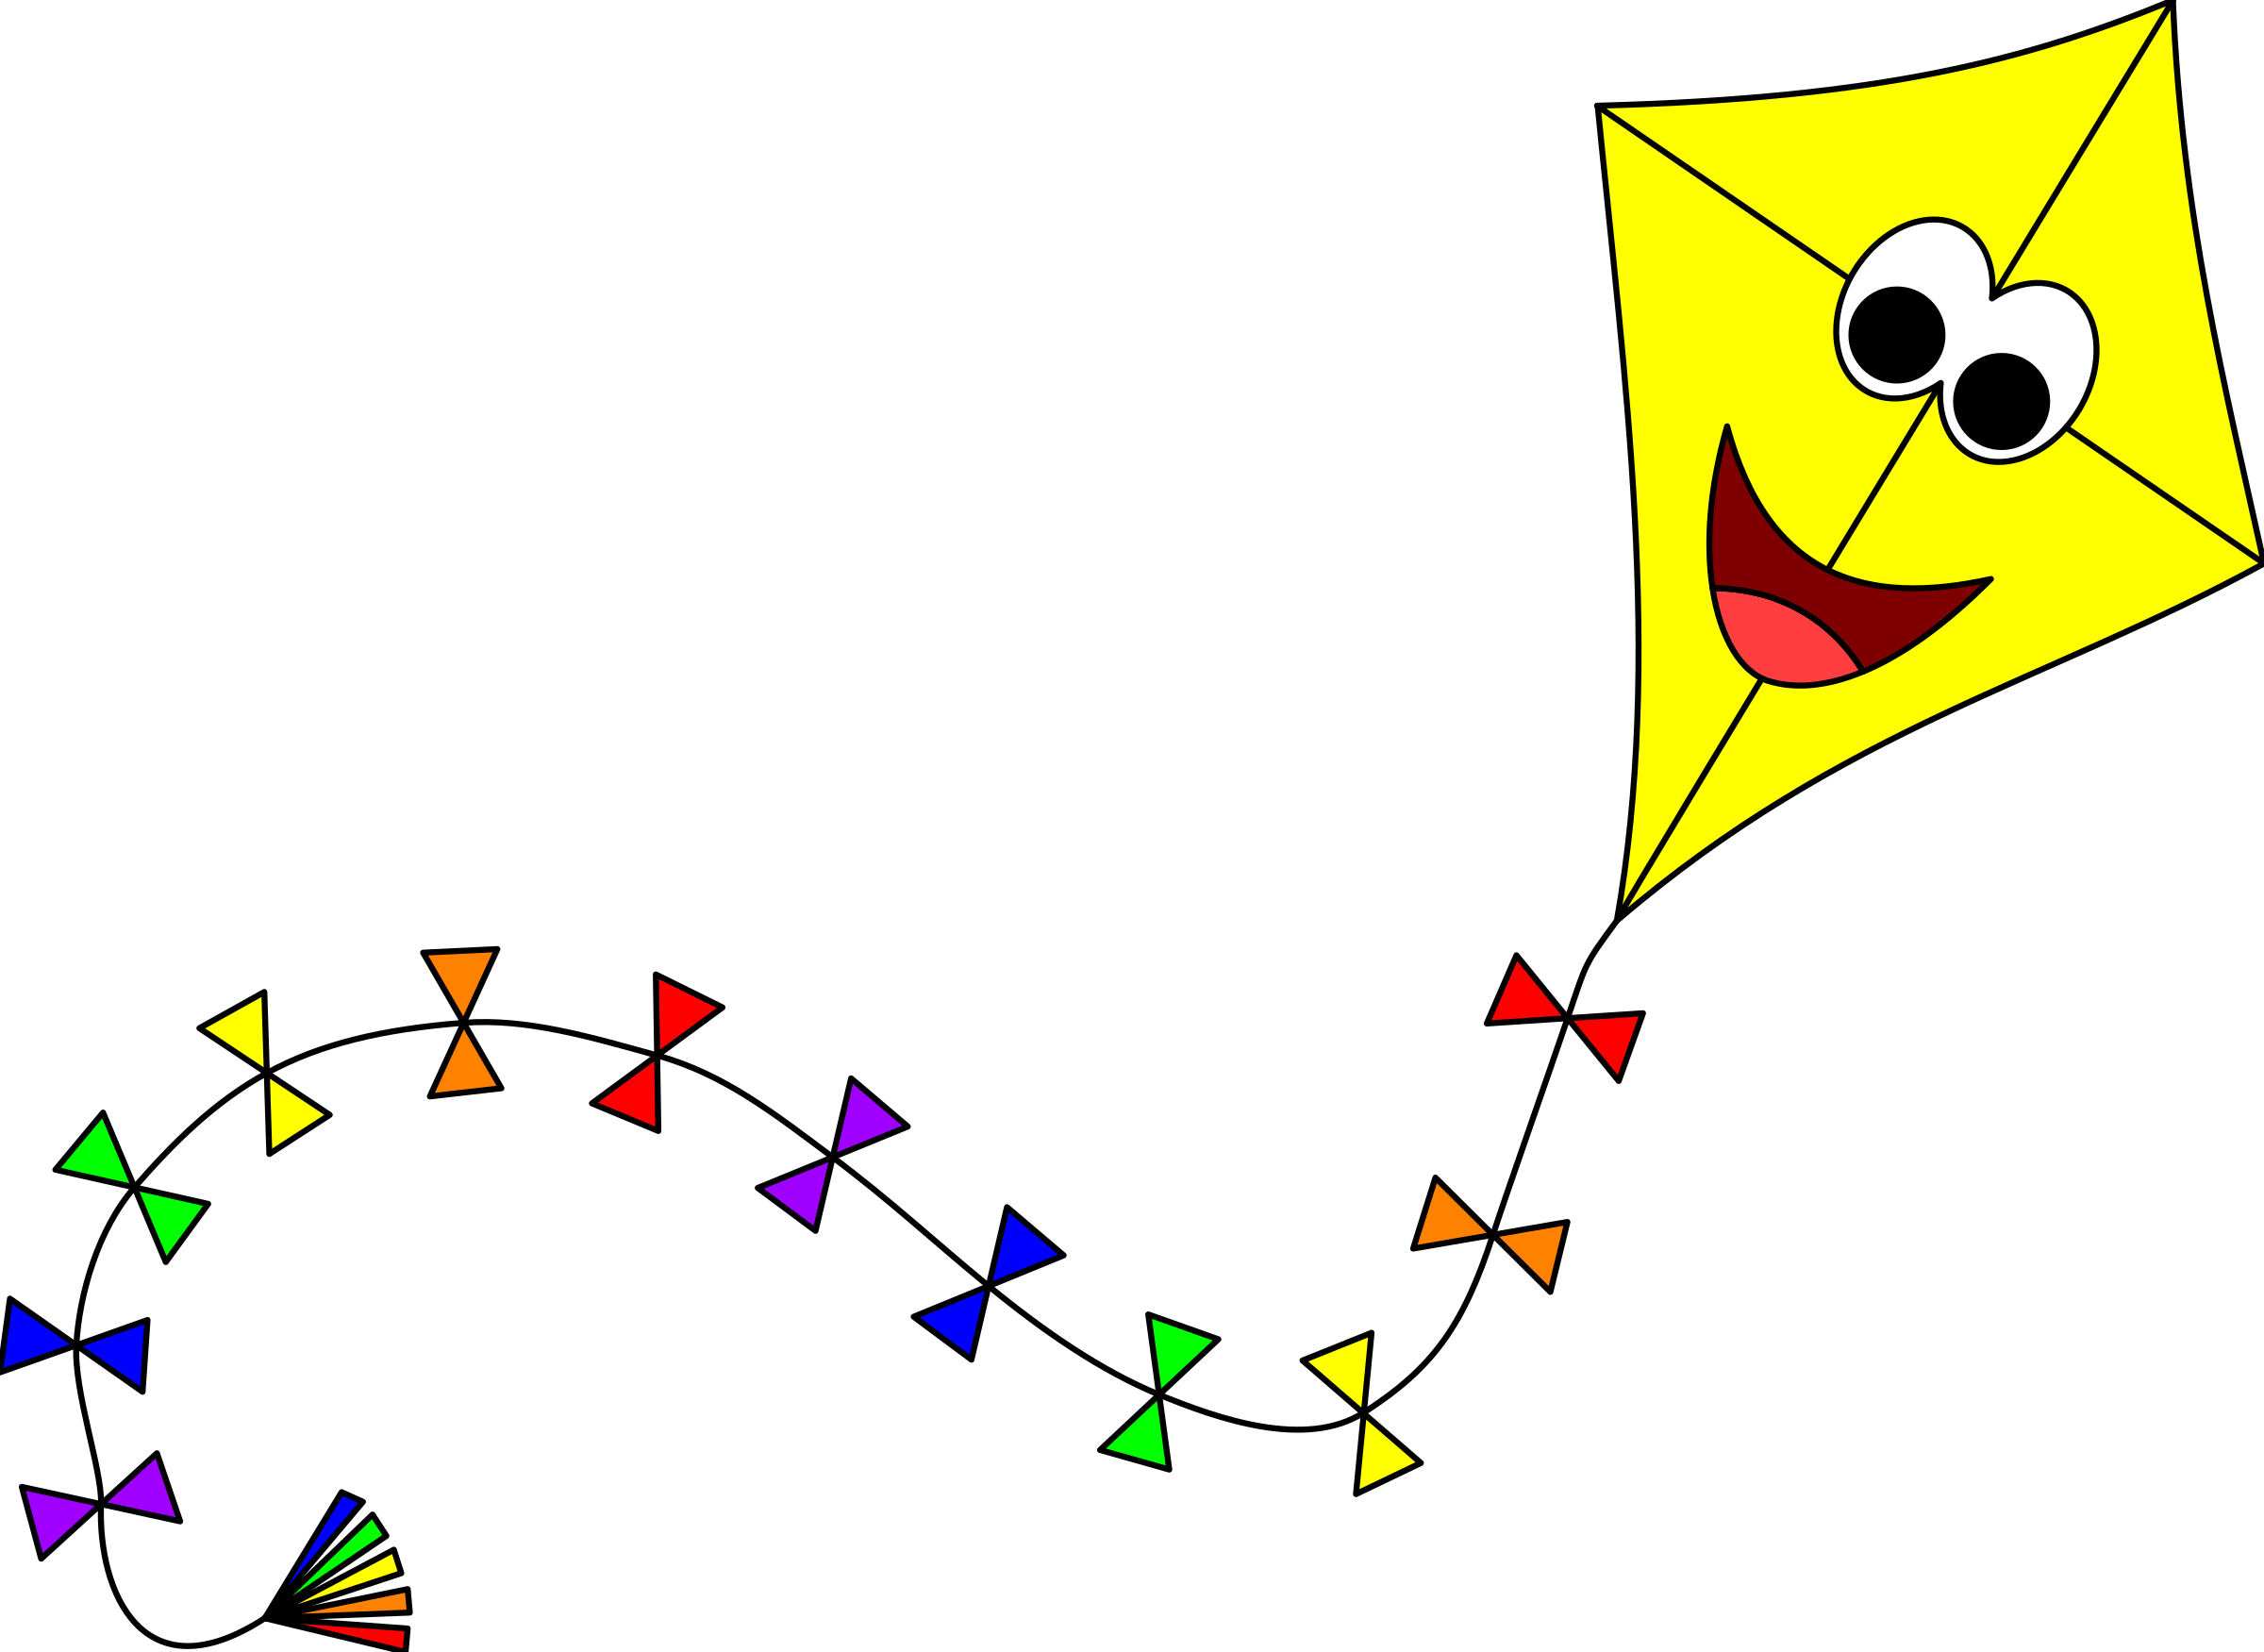 Kite clipart kite outline. Yellow with face icons